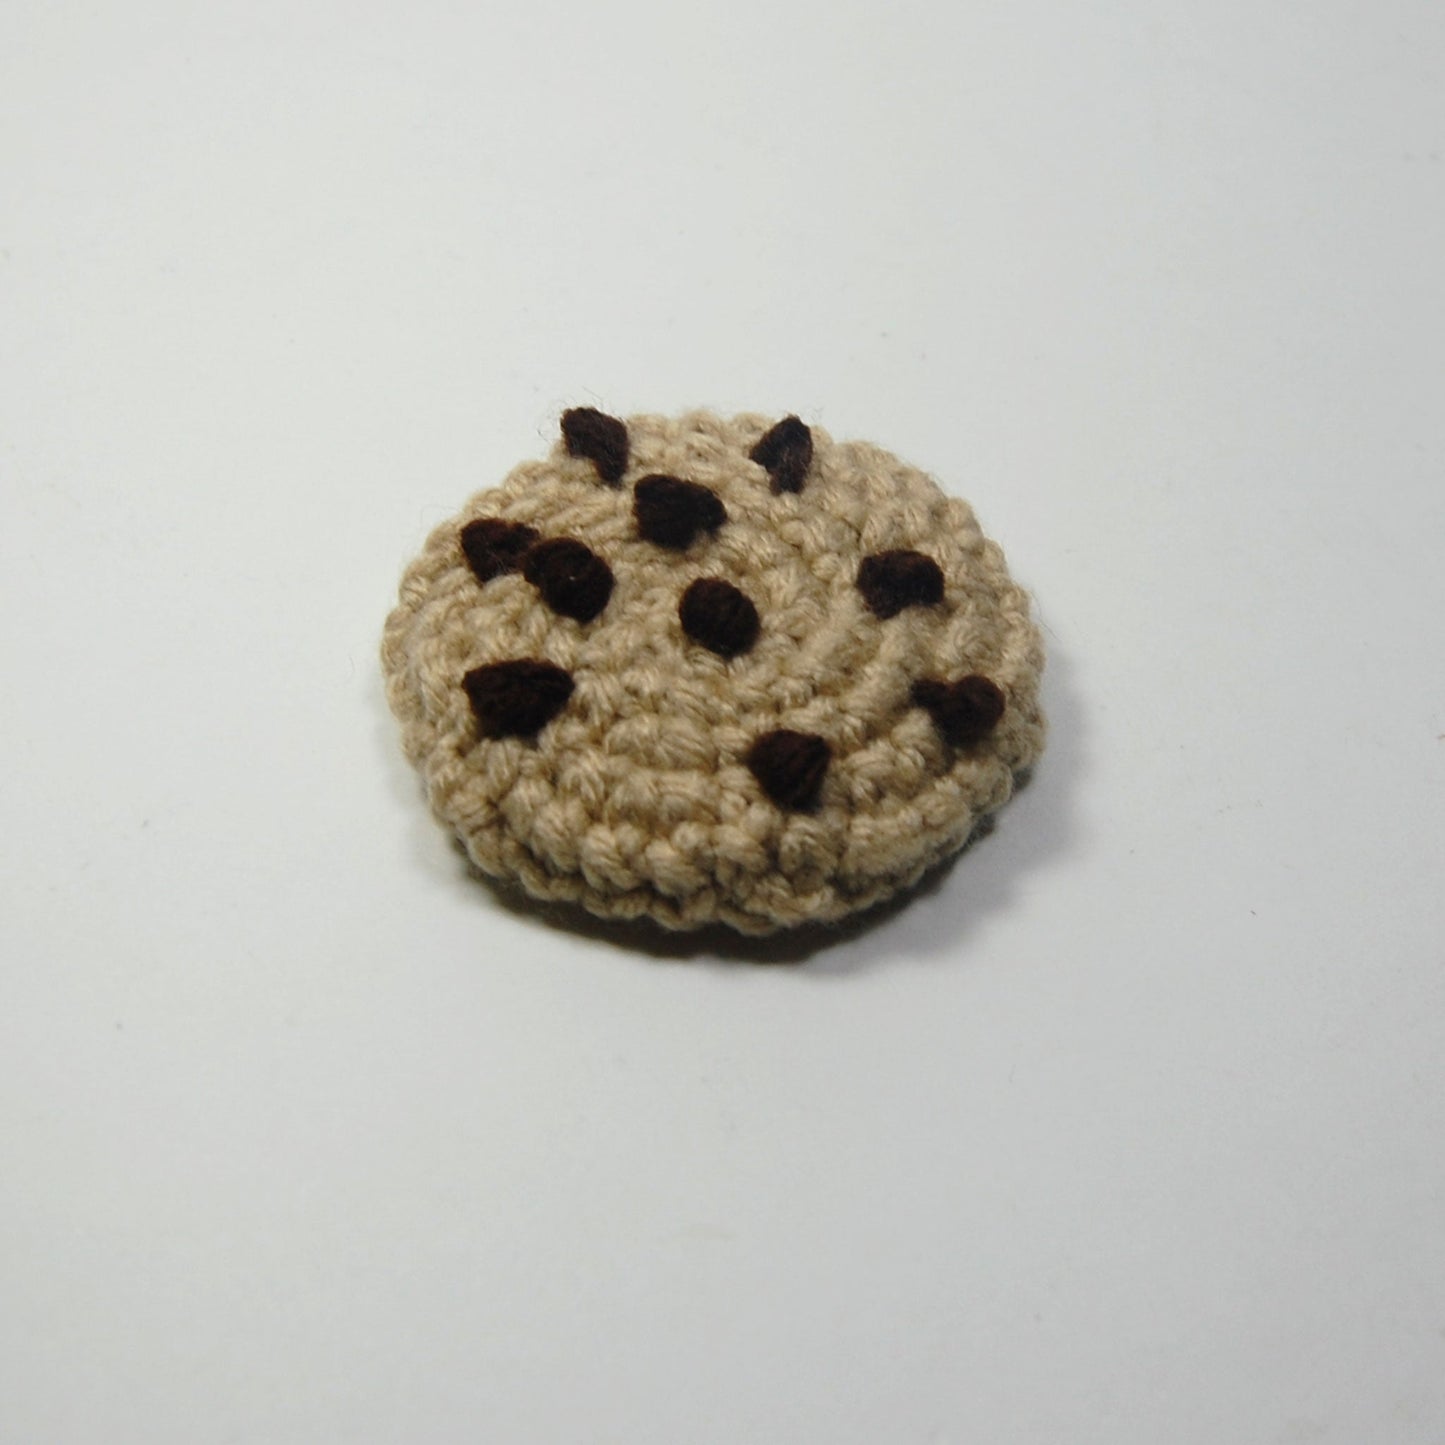 single chocolate chip crocheted cookie